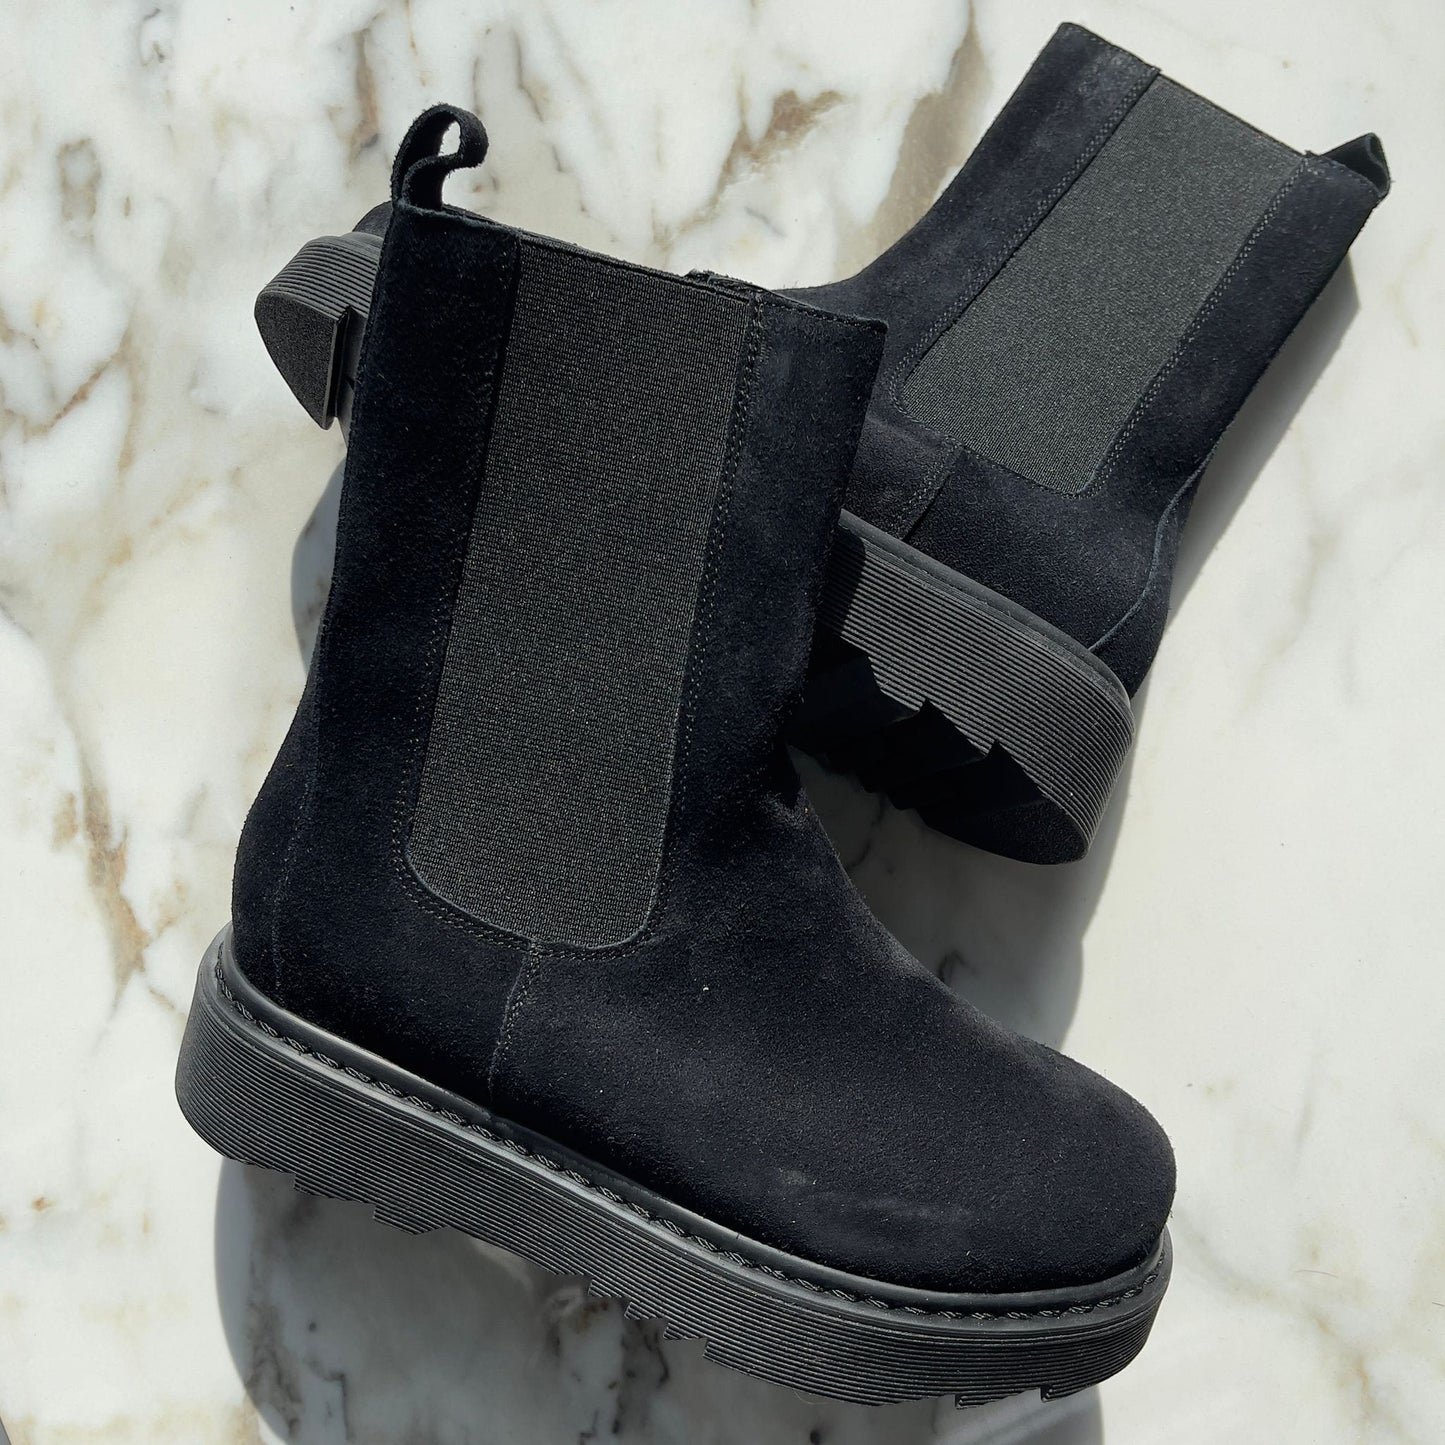 Petite black suede leather stomper boots.